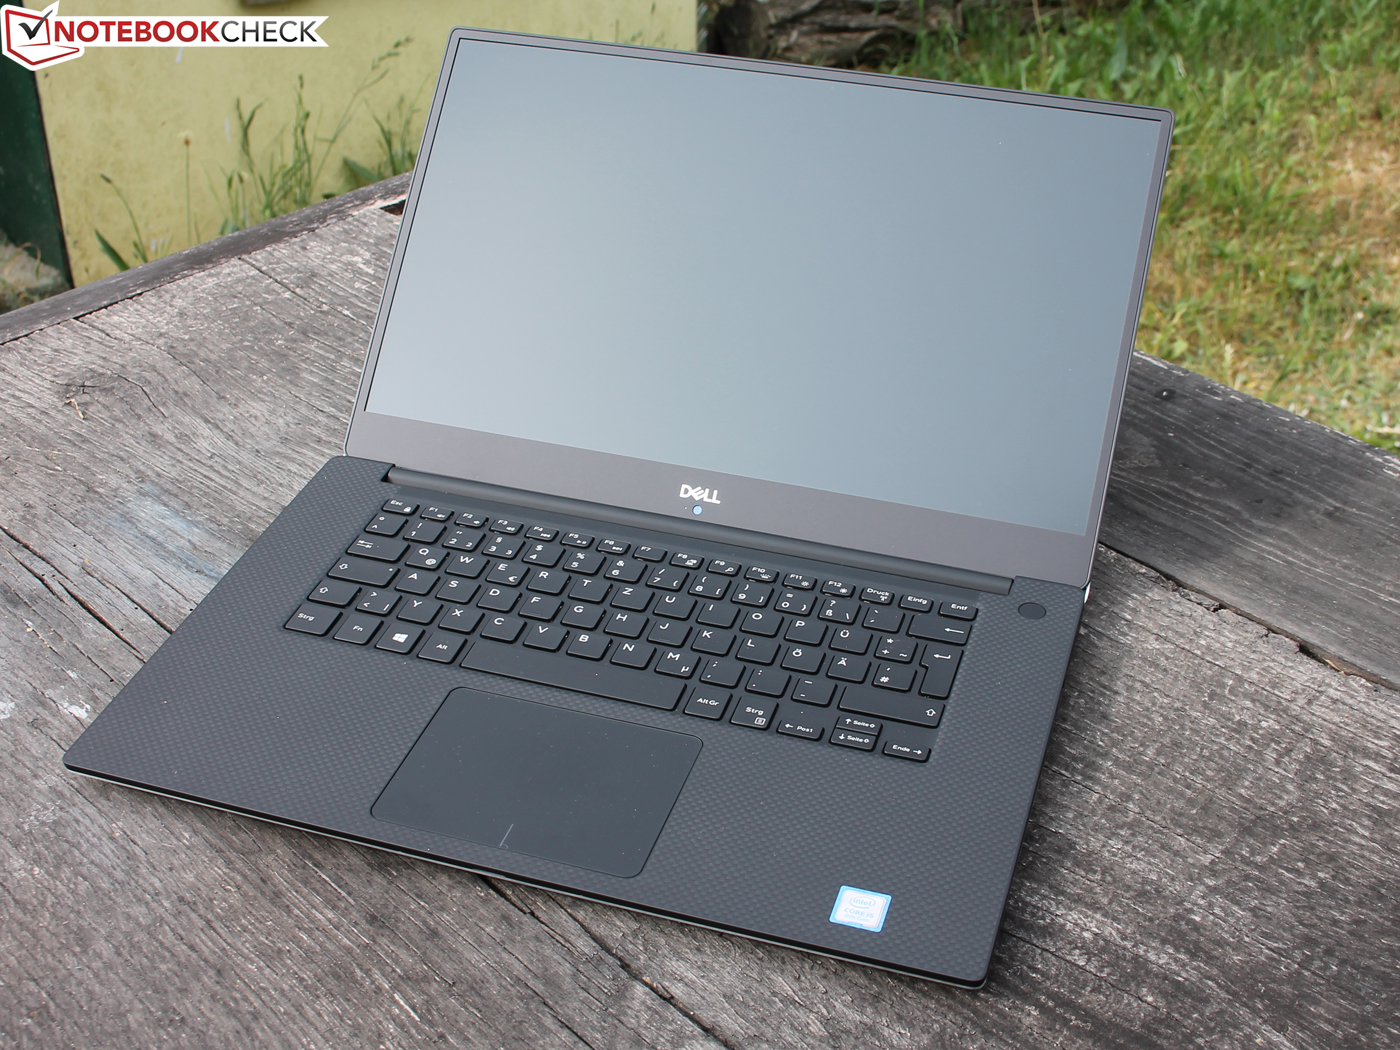 Yes, we're reviewing the Dell XPS 15 9570 with Core i7-8750H and